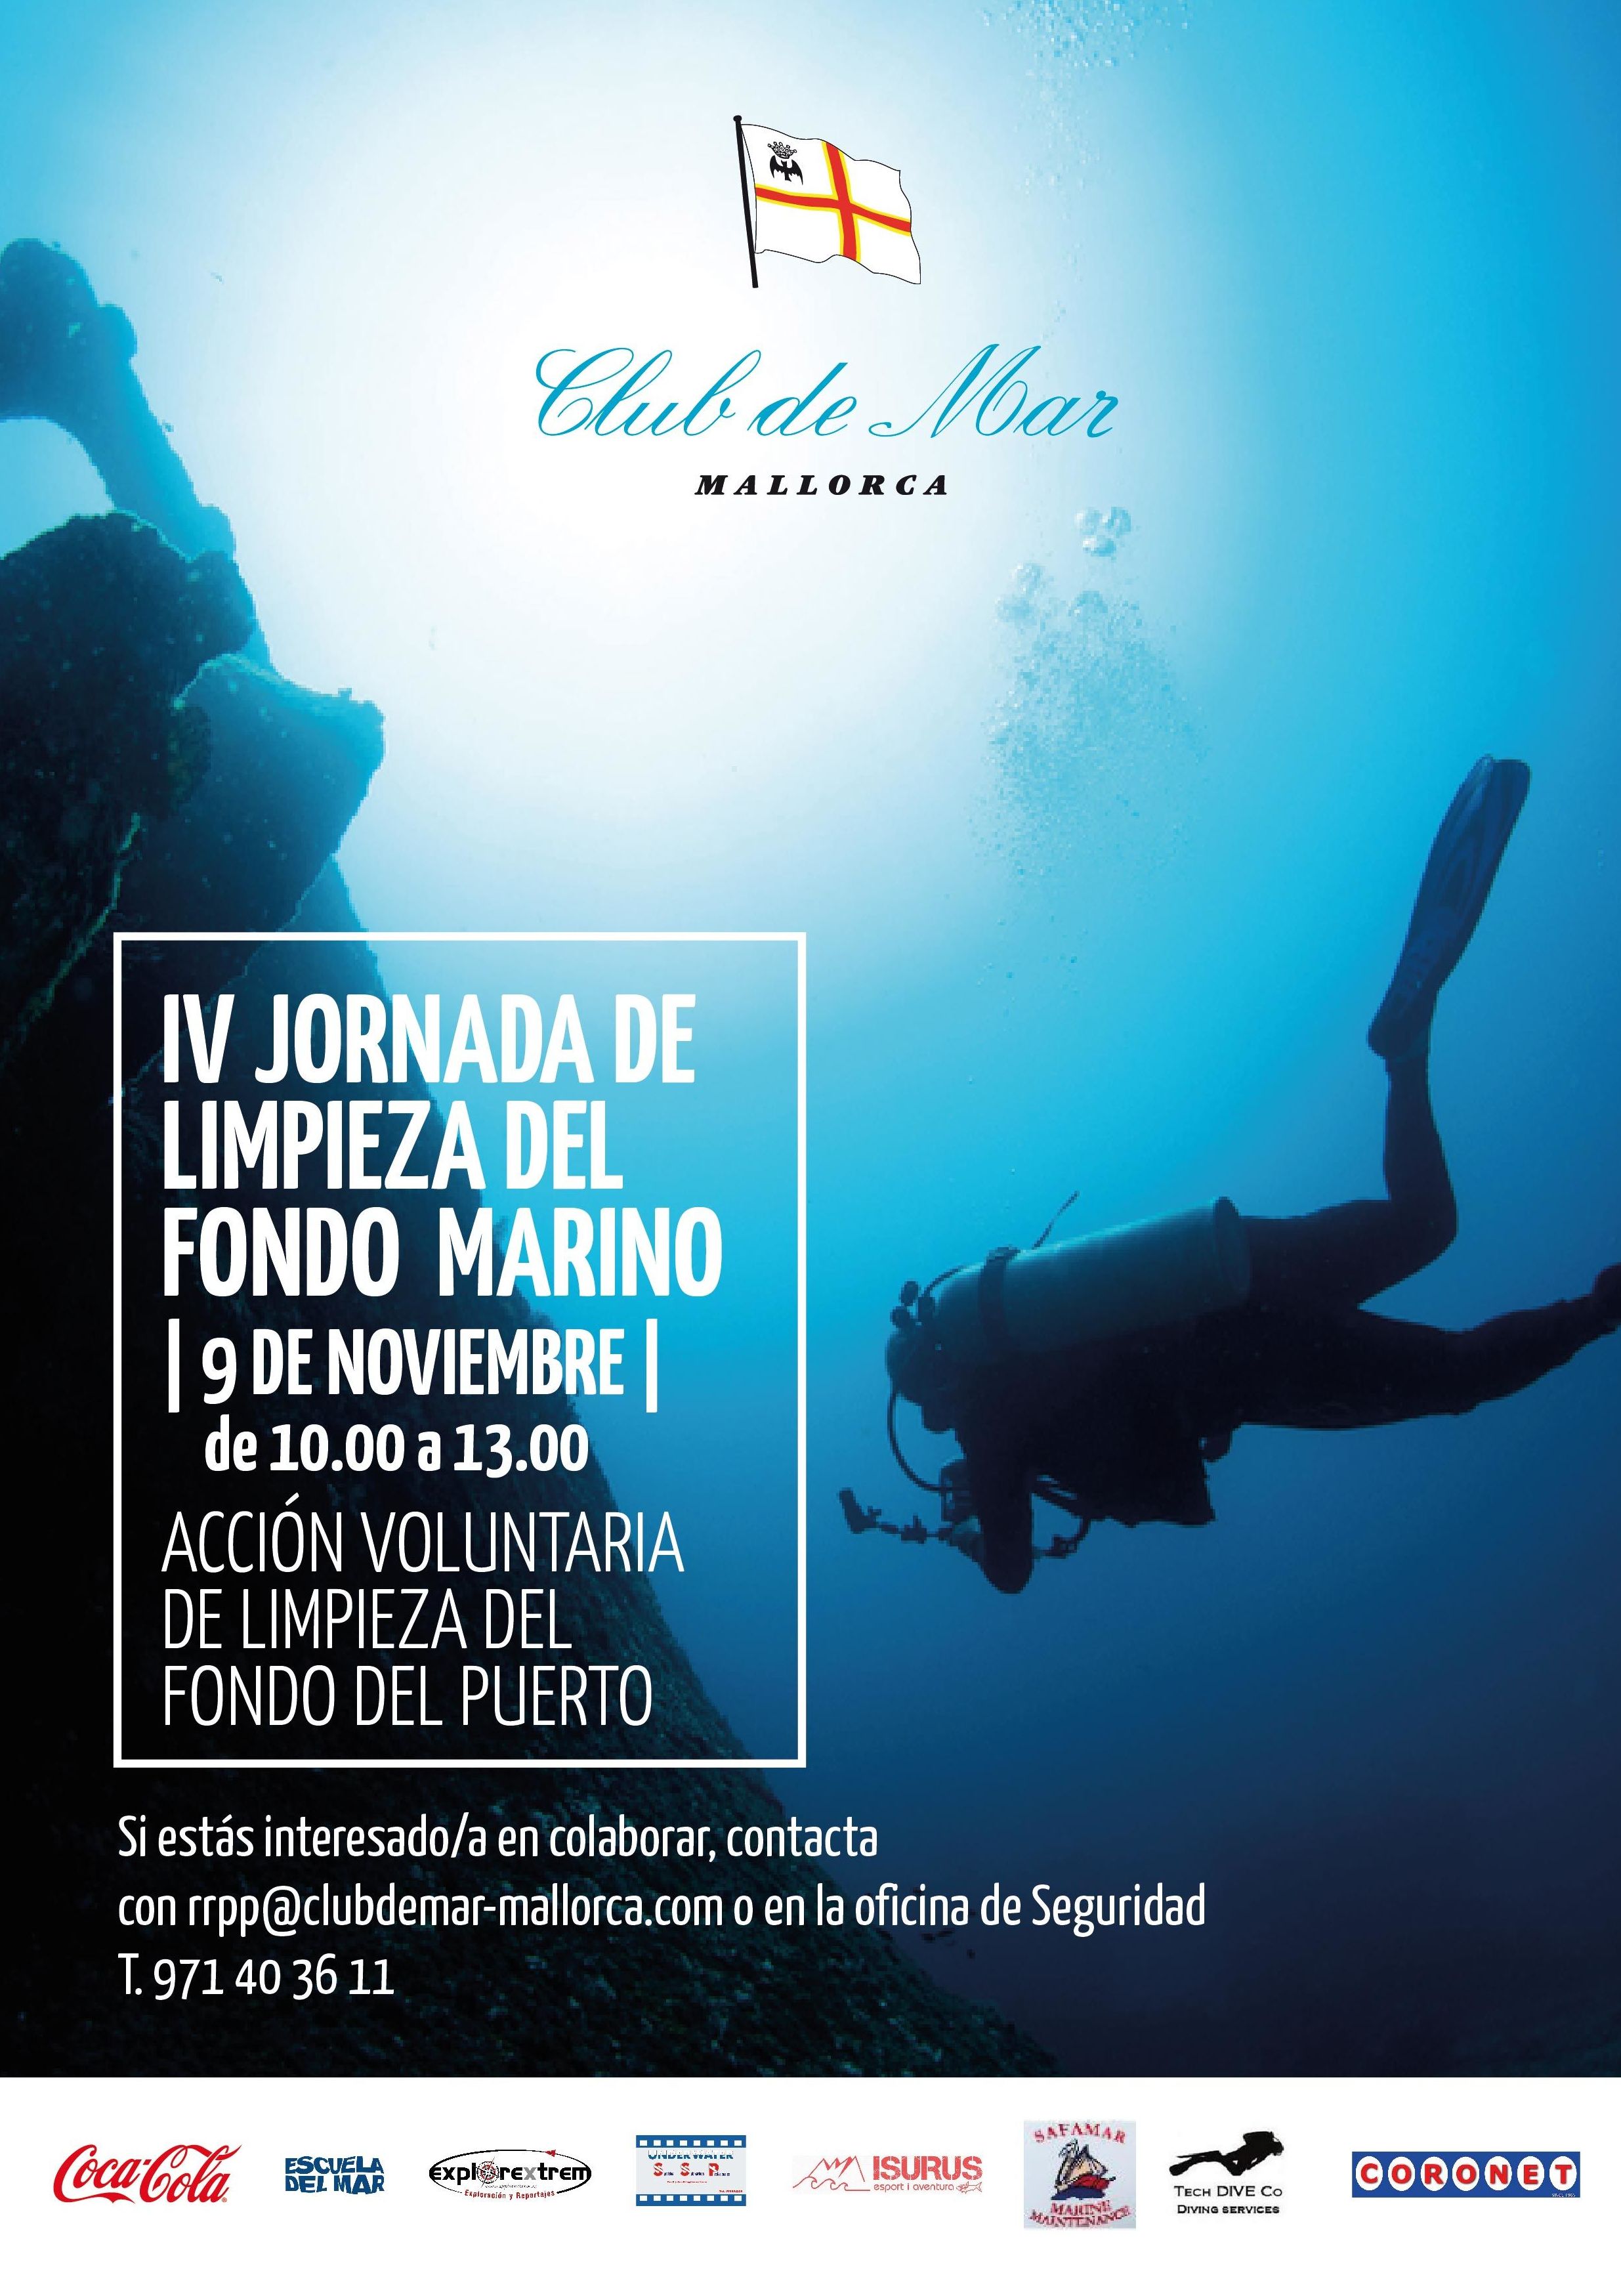 IV Day of Cleaning of the seabed Club de Mar Mallorca